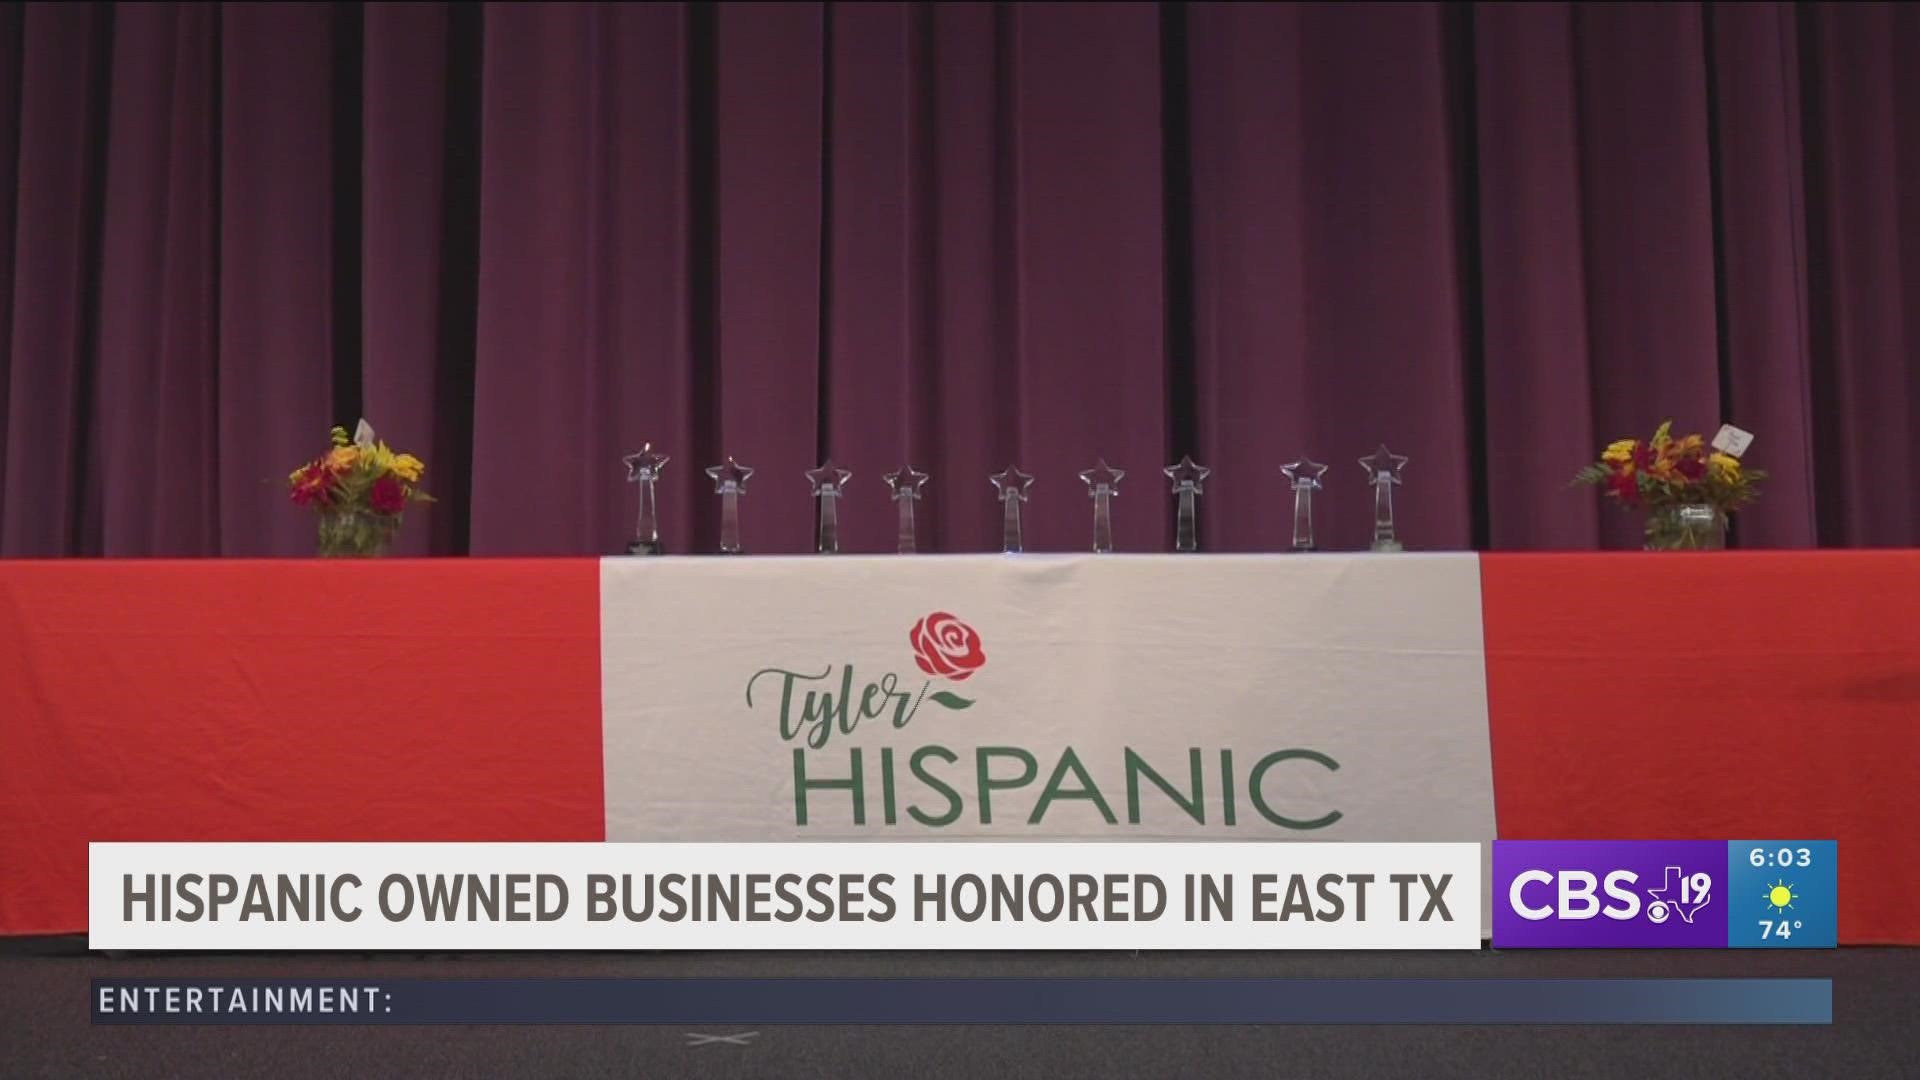 The Hispanic Business Alliance celebrated Hispanic local businesses in their 14th annual business award ceremony.